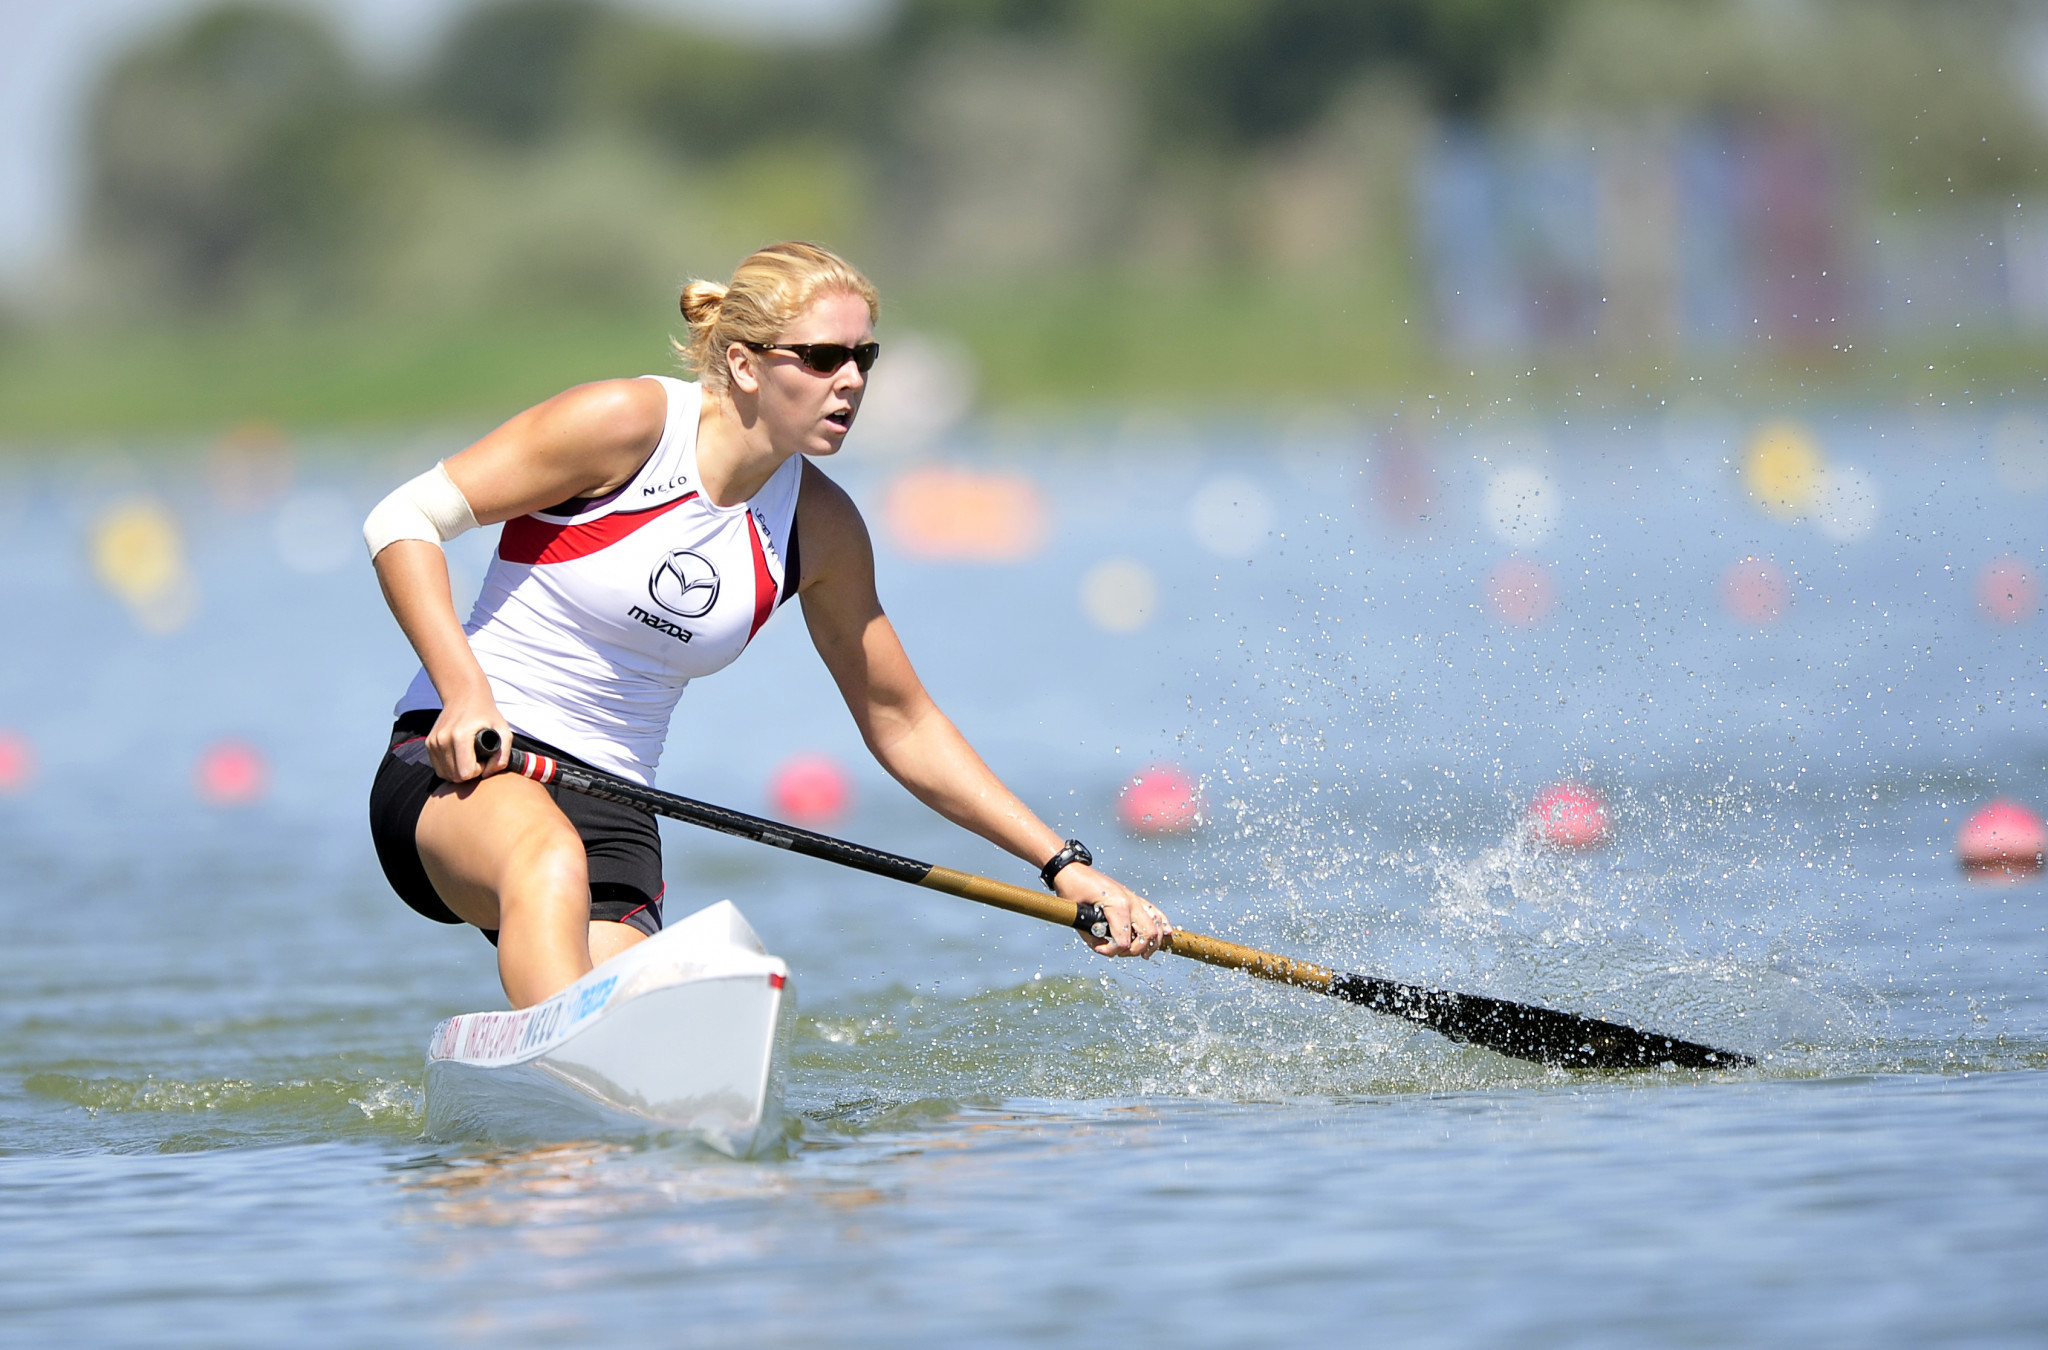 Canada's Vincent-Lapointe will be seeking to keep her perfect C1 200 metres record intact at the ICF Canoe Sprint World Cup that starts in Poznań tomorrow ©Getty Images